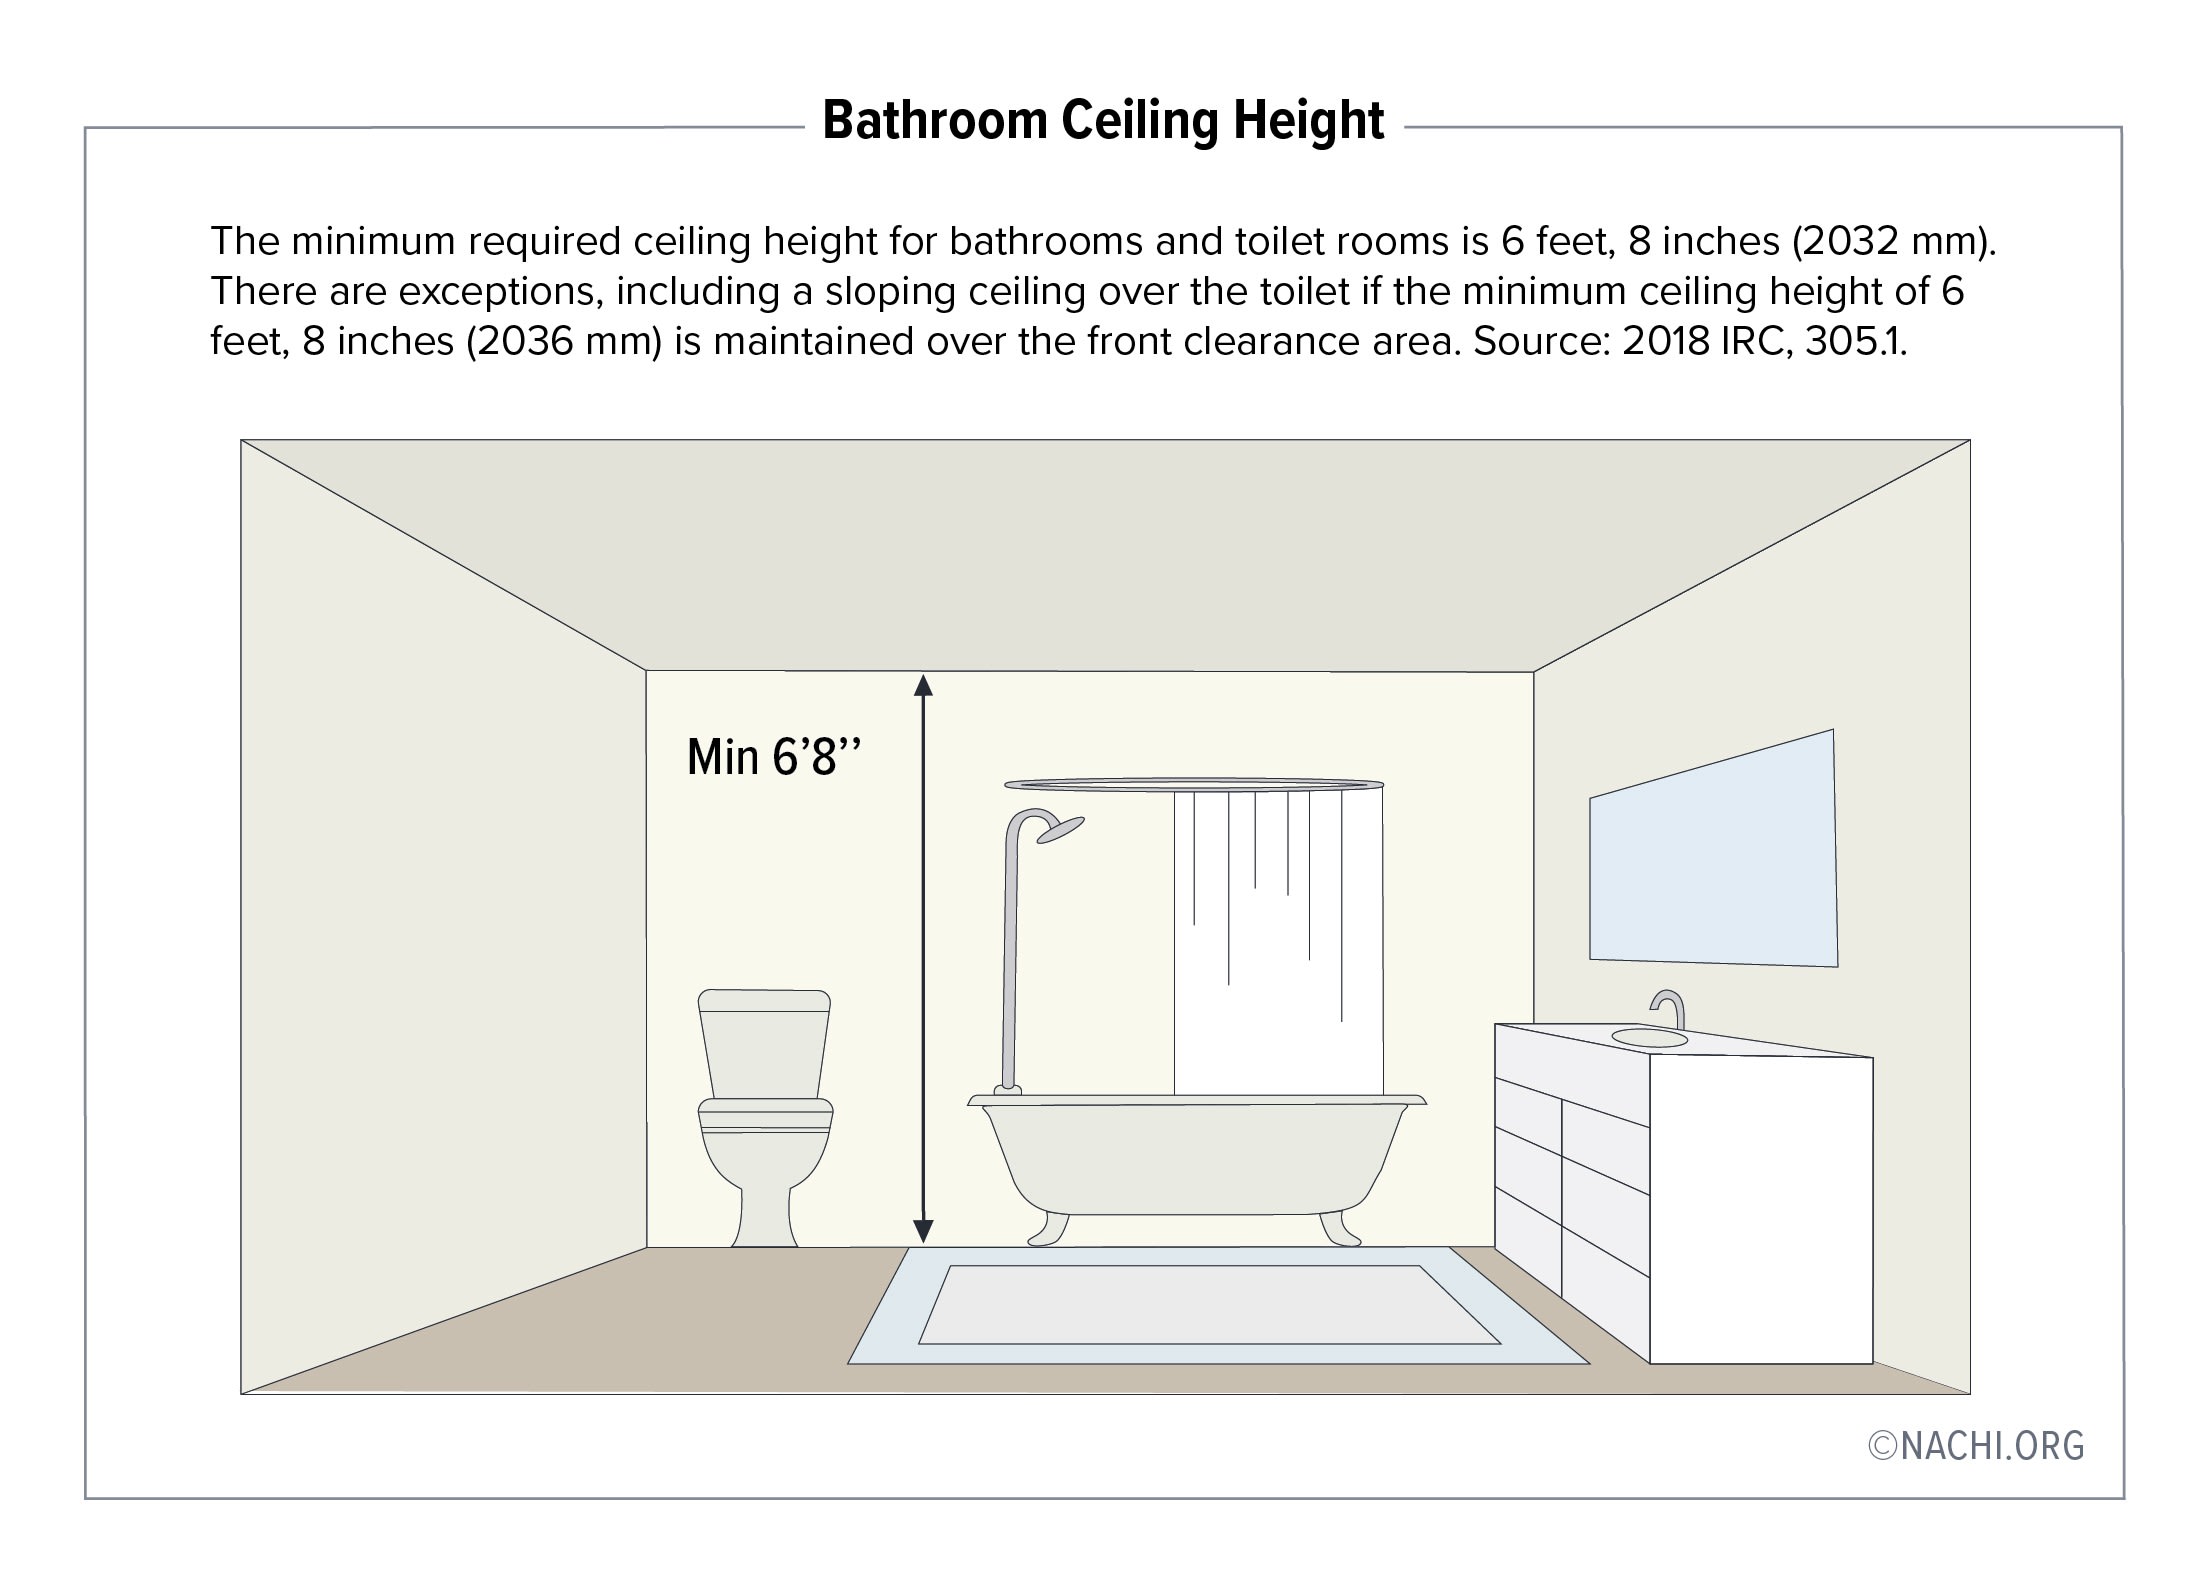 The minimum ceiling height for bathrooms and toilet rooms is 6 feet, 8 inches (2032mm). There are exceptions, including a sloping ceiling over the toilet if the minimum ceiling height of 6 feet, 8 inches (2032mm) is maintained over the front clearance area. Source, 2018 IRC, 305.1.